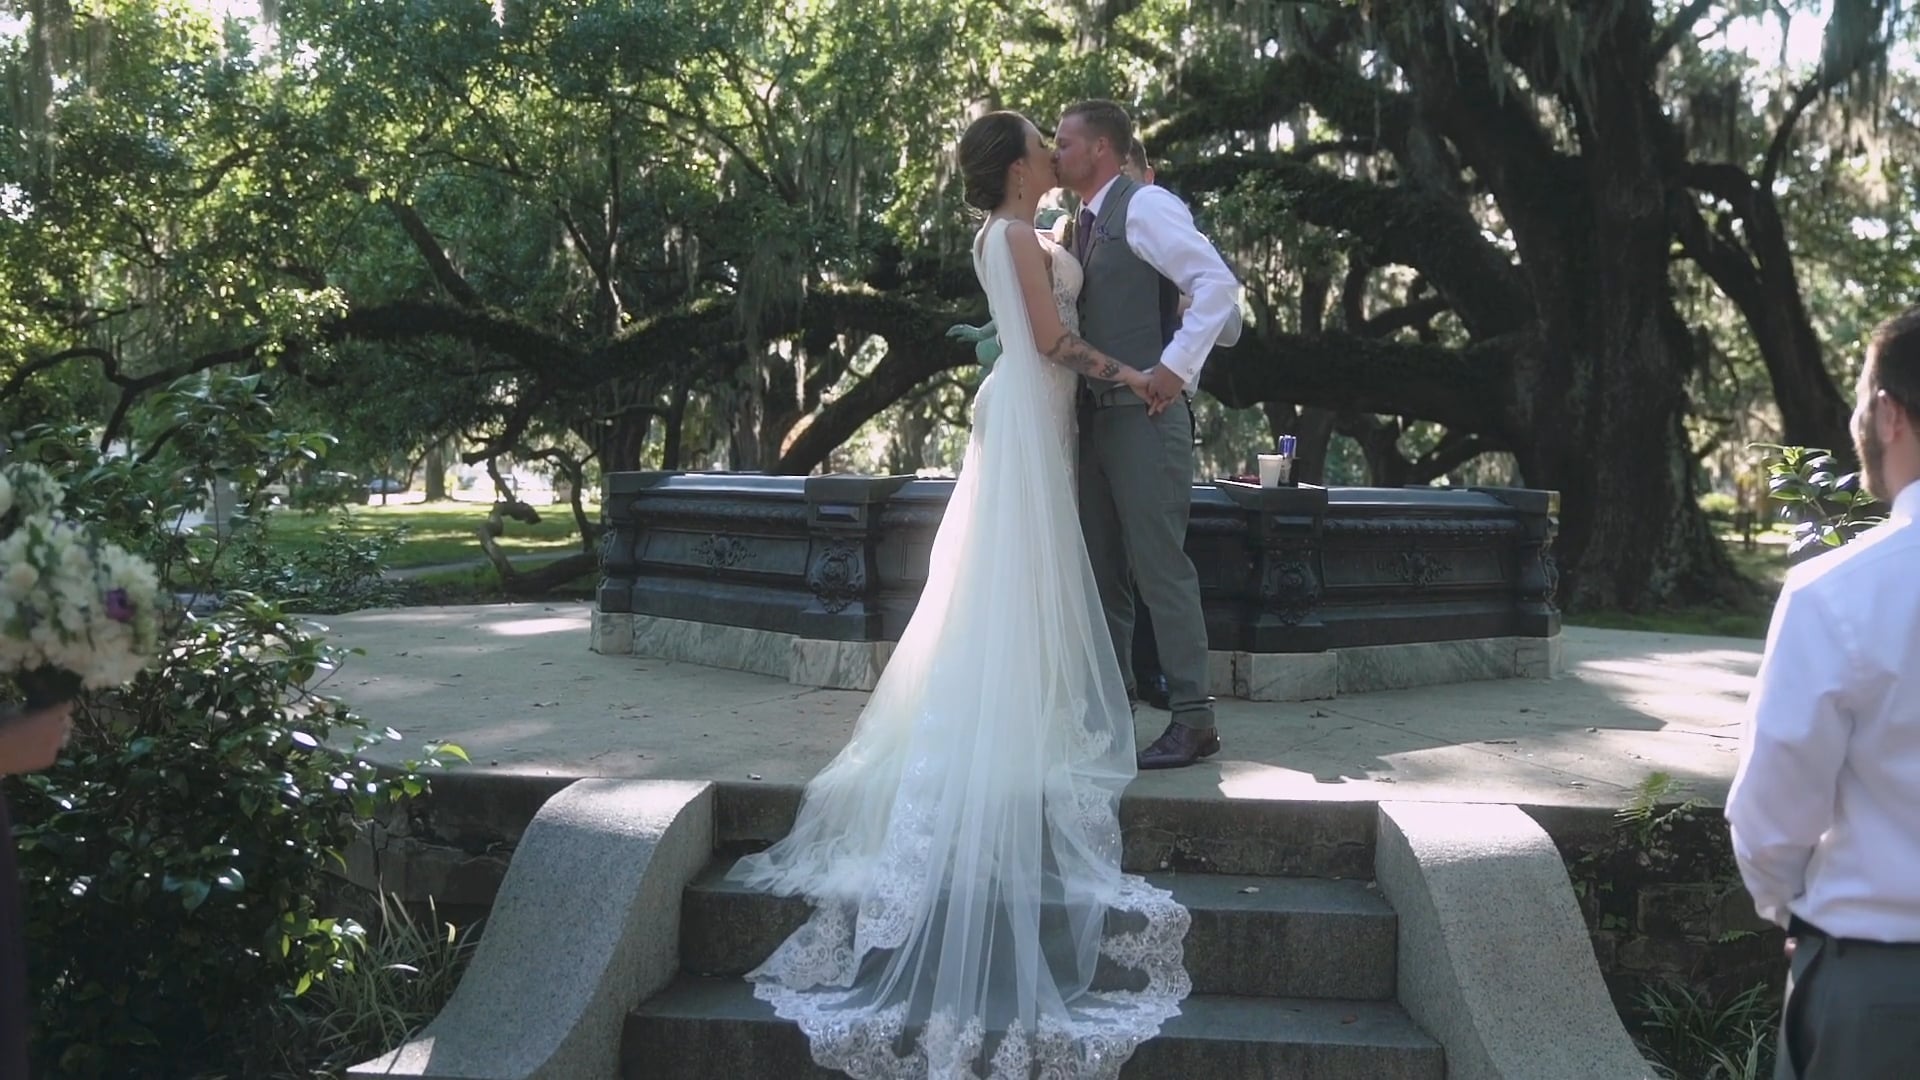 Ashley & Andrew | Instagram Highlight | An Intimate New Orleans Destination Wedding in City Park